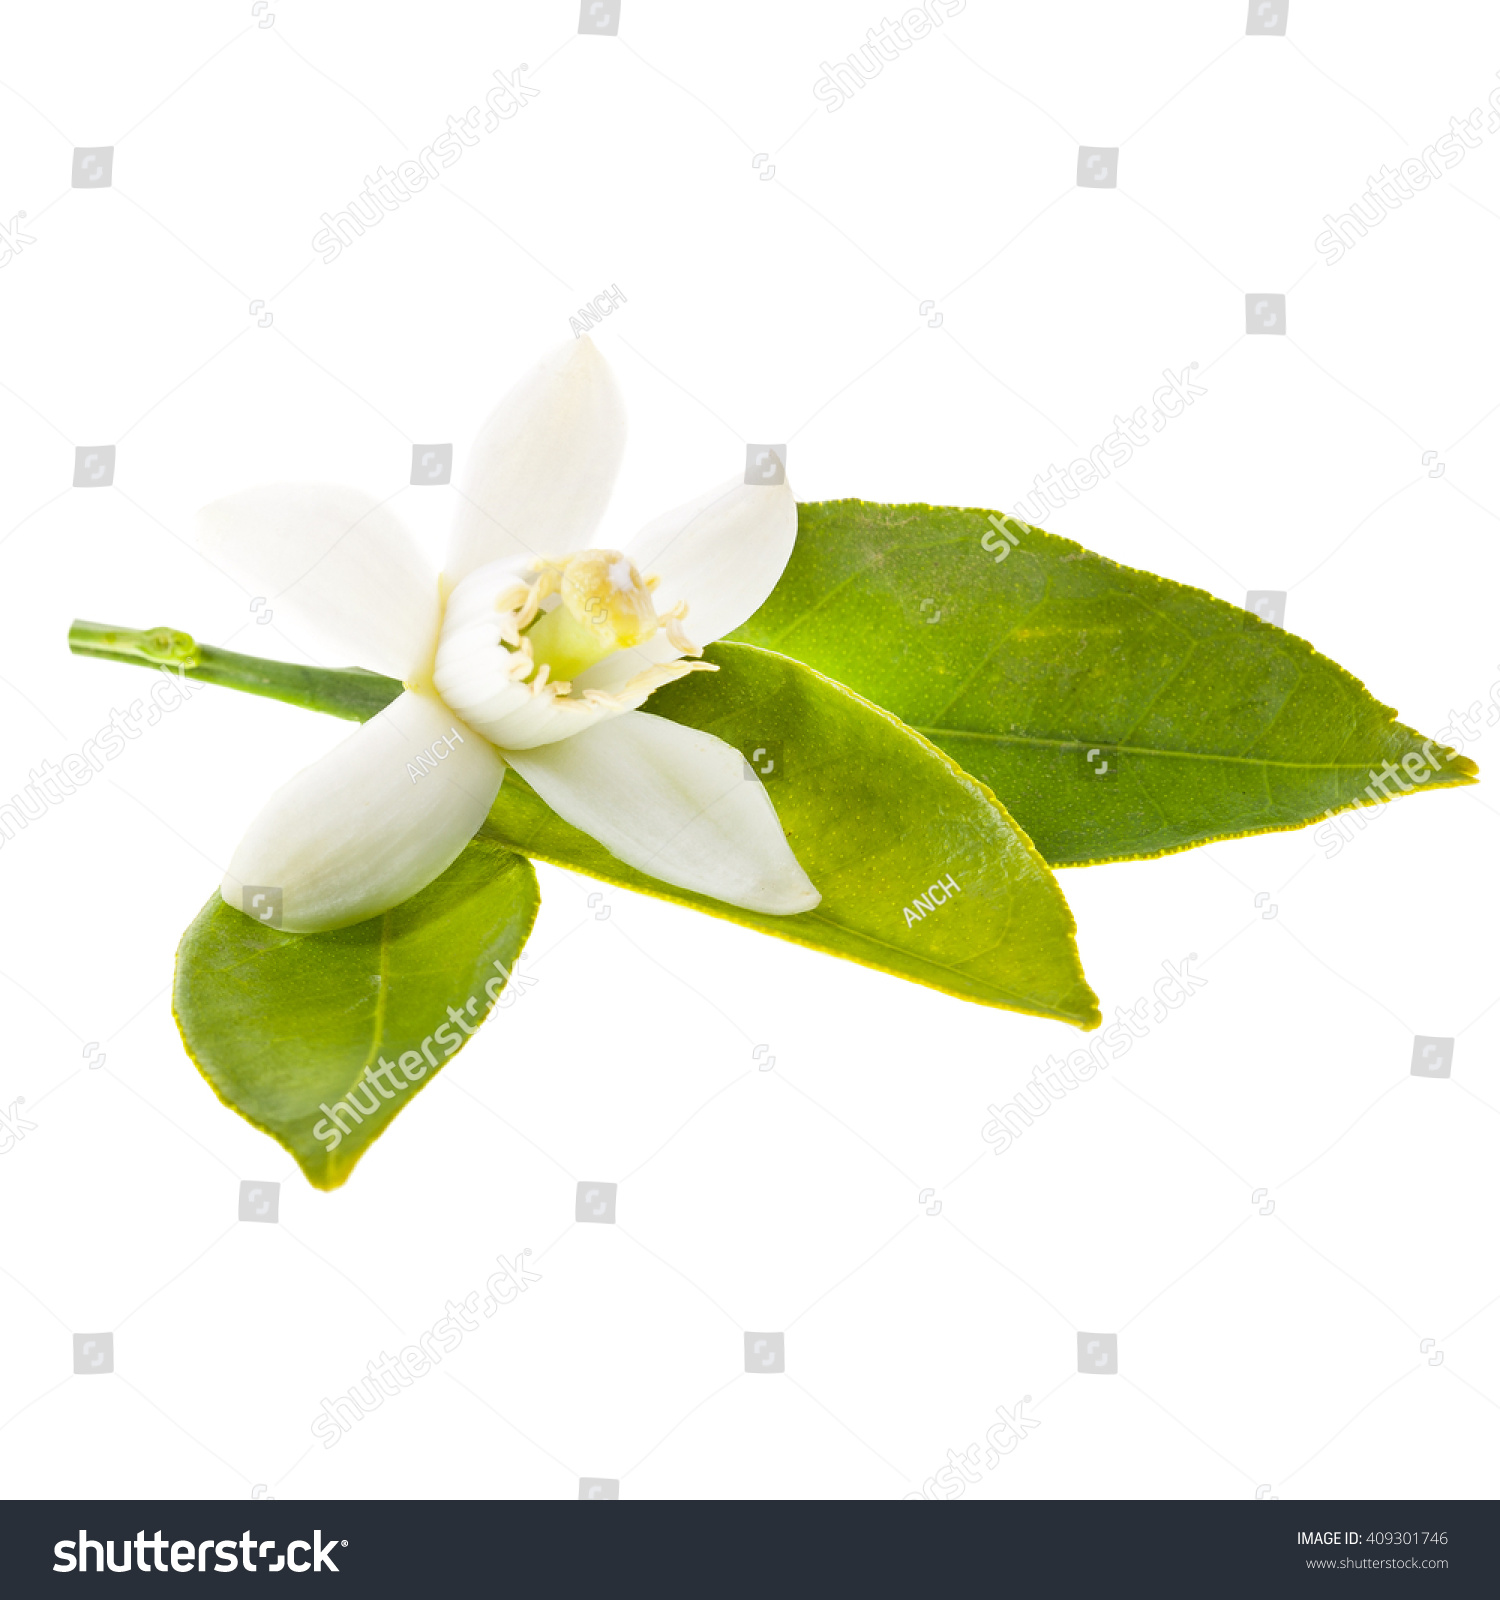 Orange tree flowers on a branch close-up
 isolated on white background #409301746